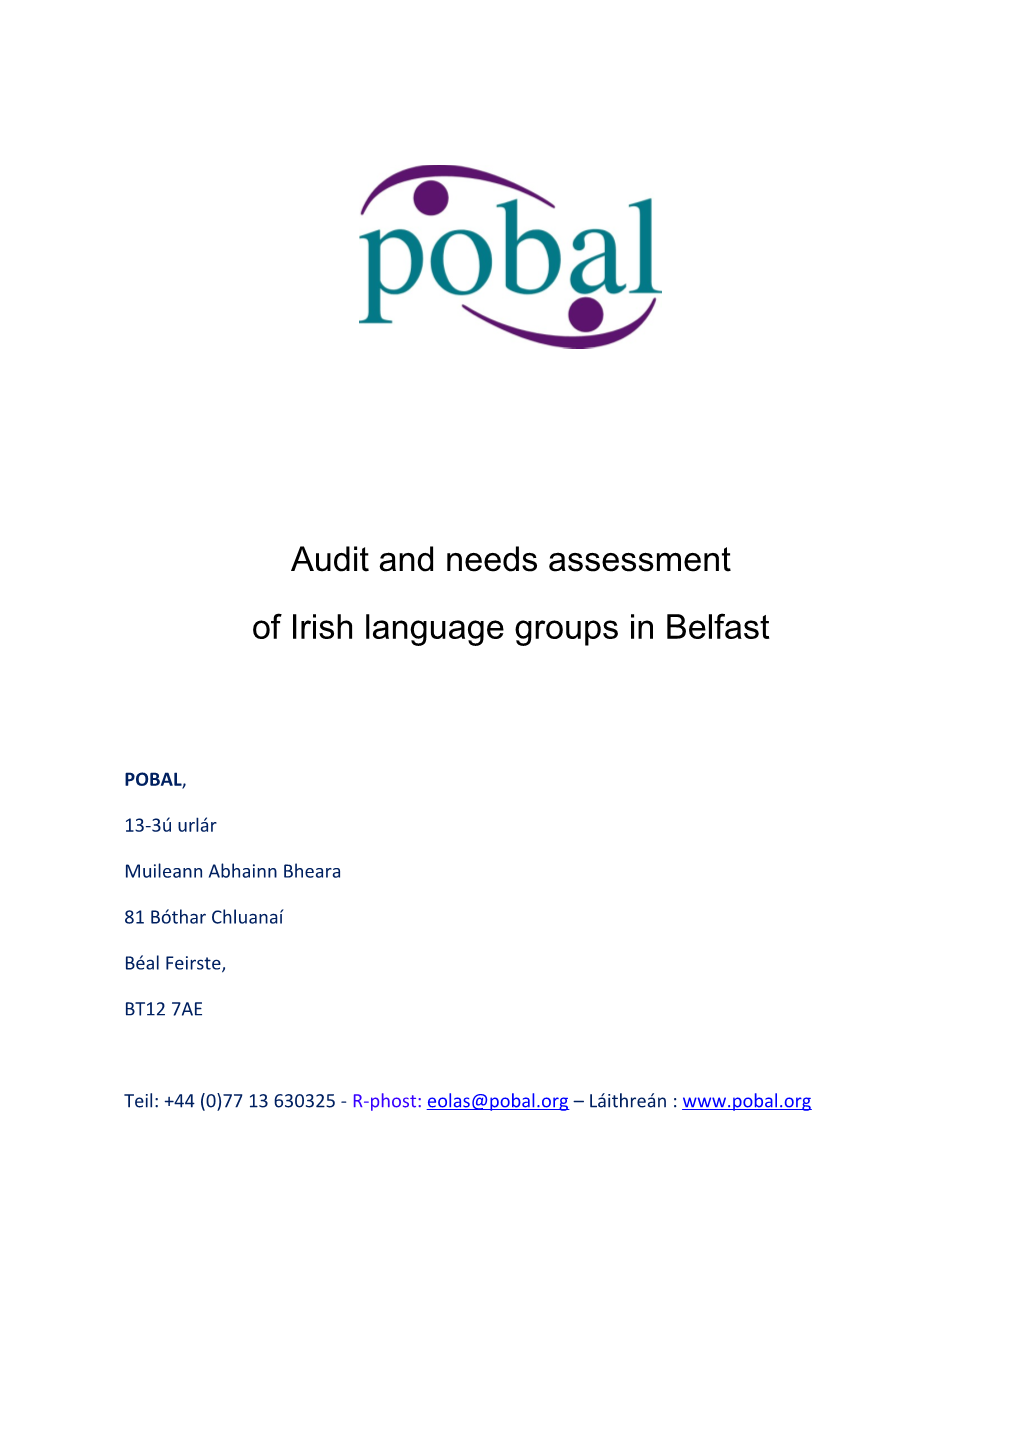 Audit and Needs Assessment